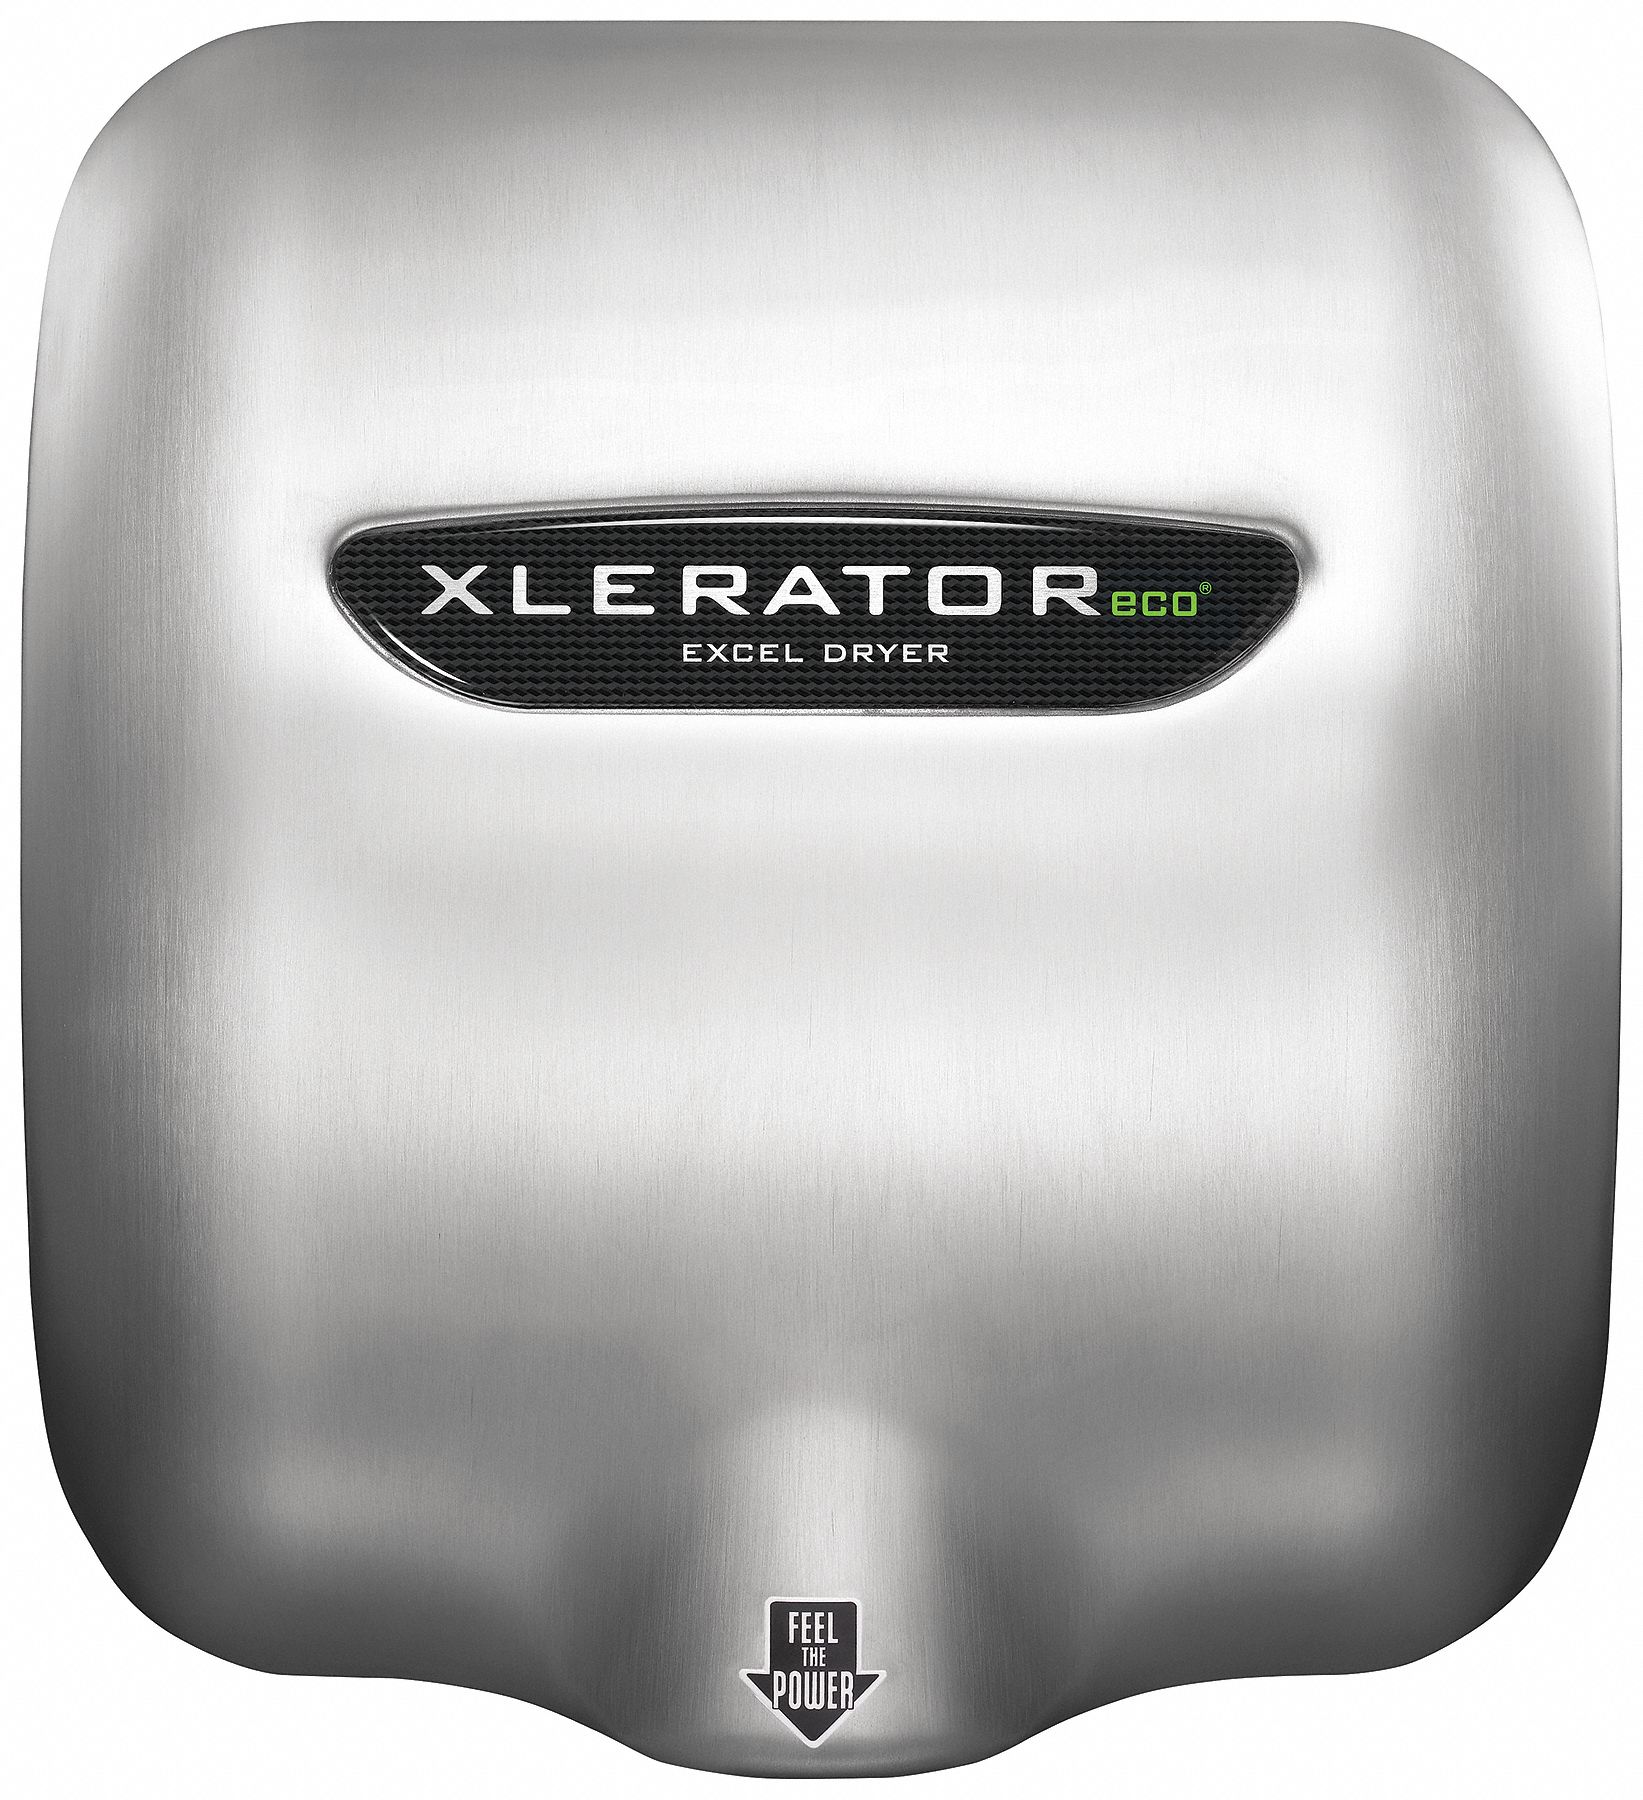 Hand Dryer: Auto, 12 sec Dry Time, Stainless Steel, Silver, 56 to 66 dBA, 208 to 277V AC